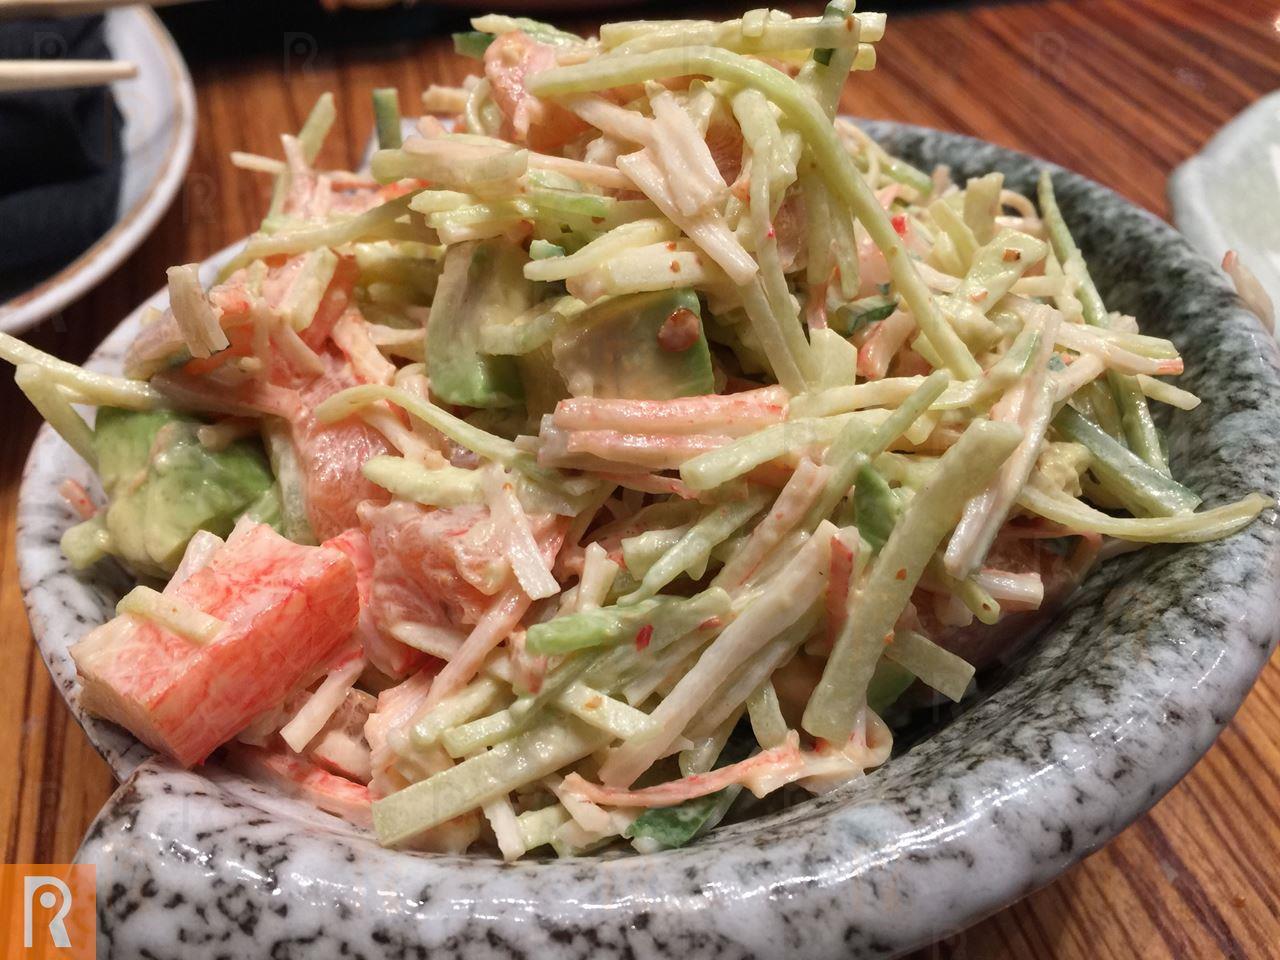 Salad contains Salmon, crabstick, avocado, cucumber, iceberg and spicy mayonnaise